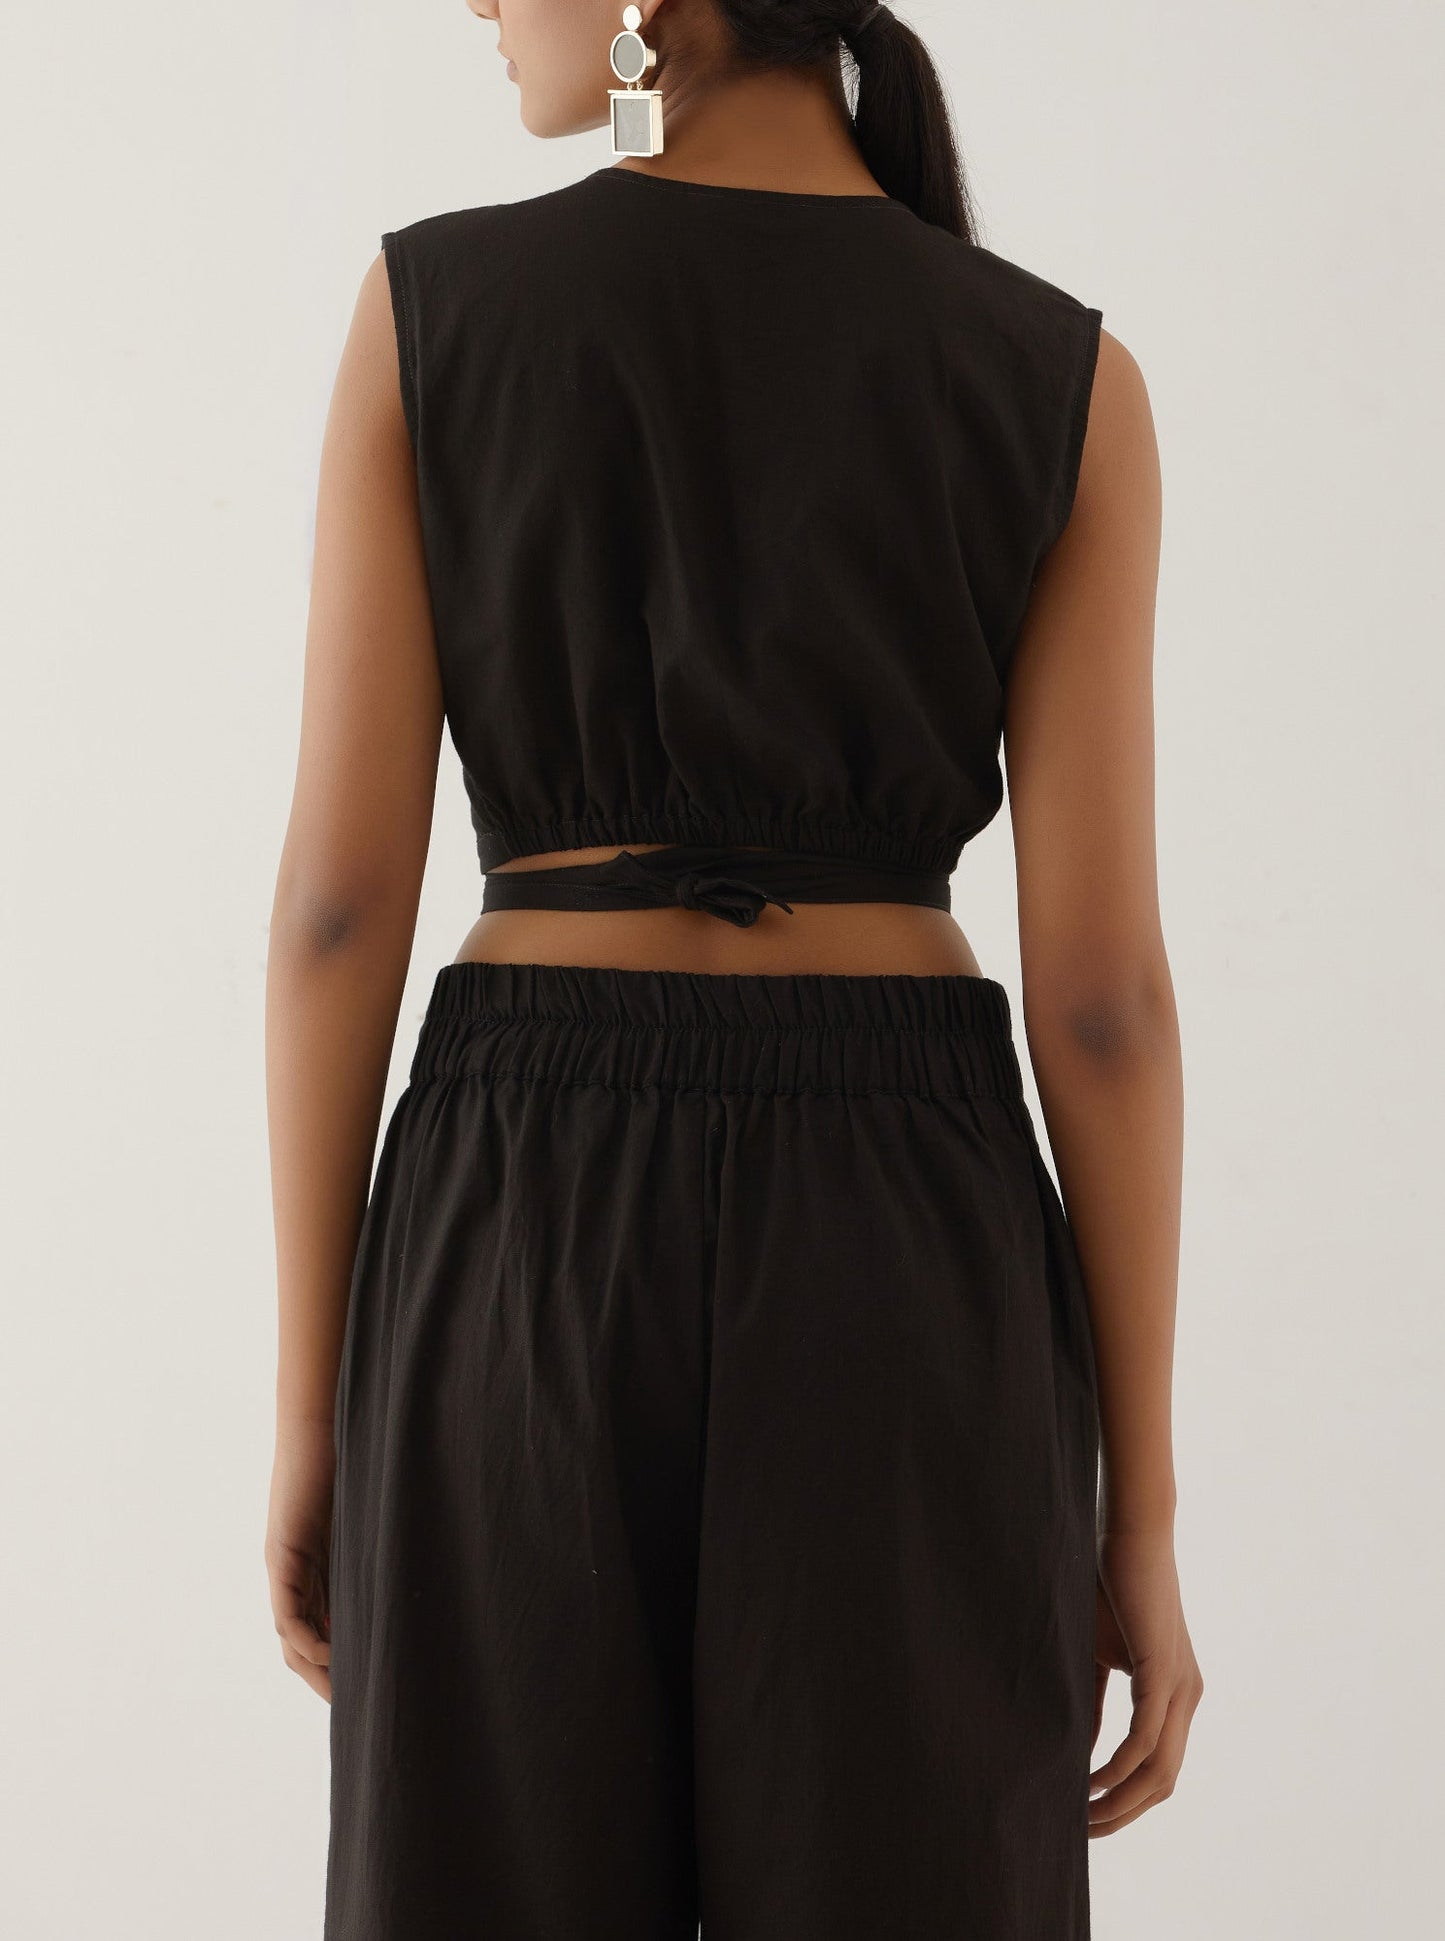 Black Collared Crop Top - The Indian Cause